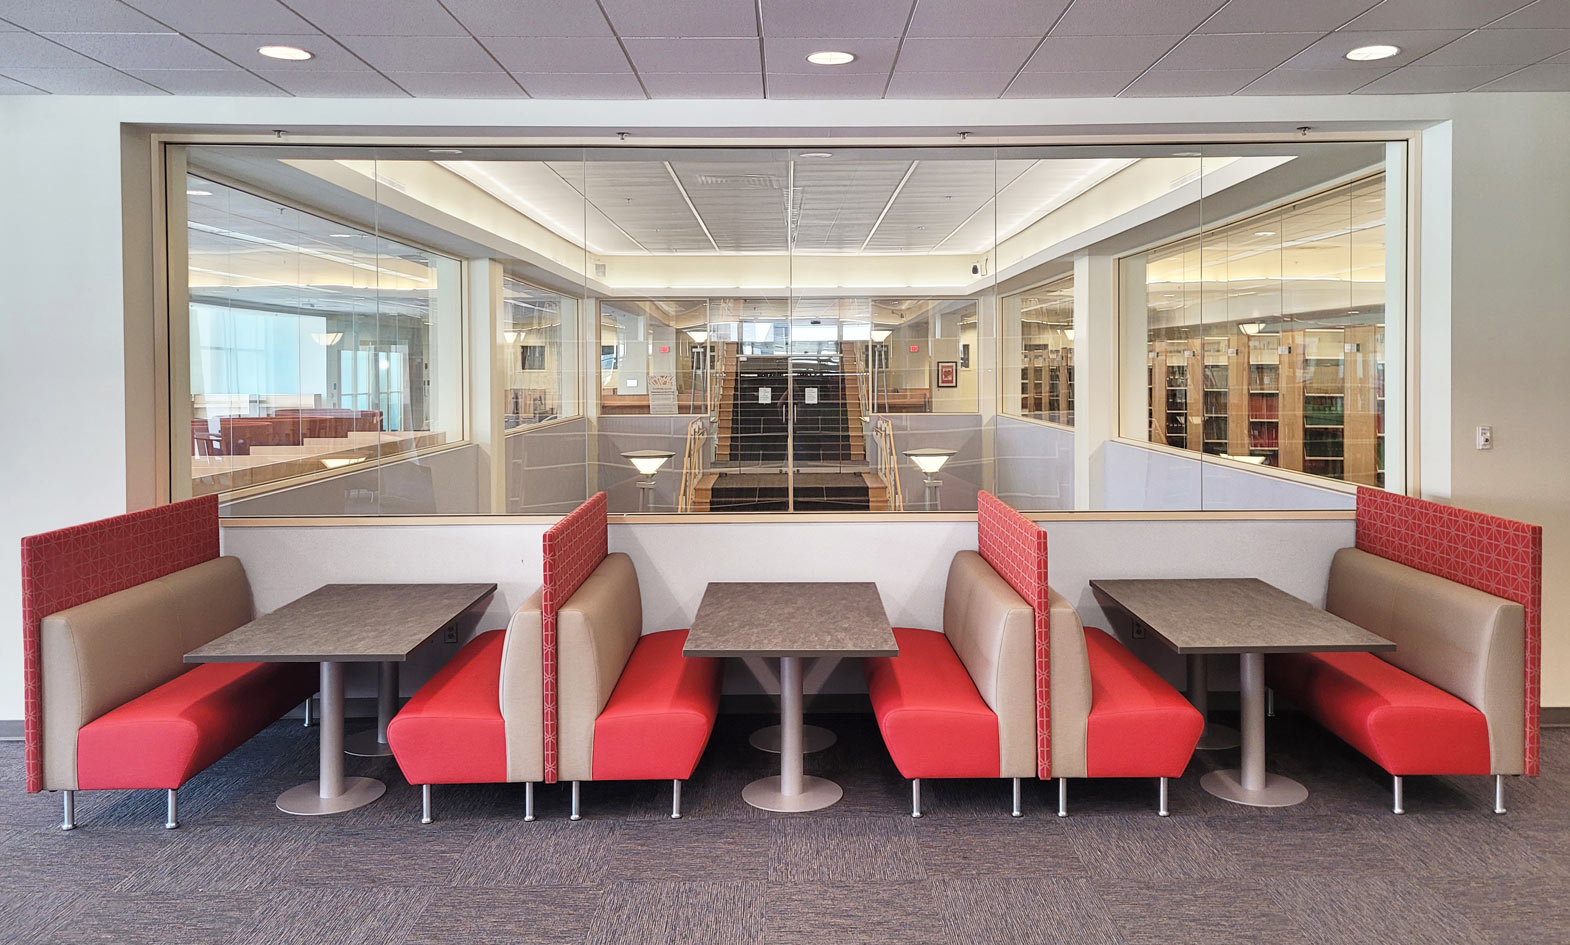 University Library Booths with acoustic panels